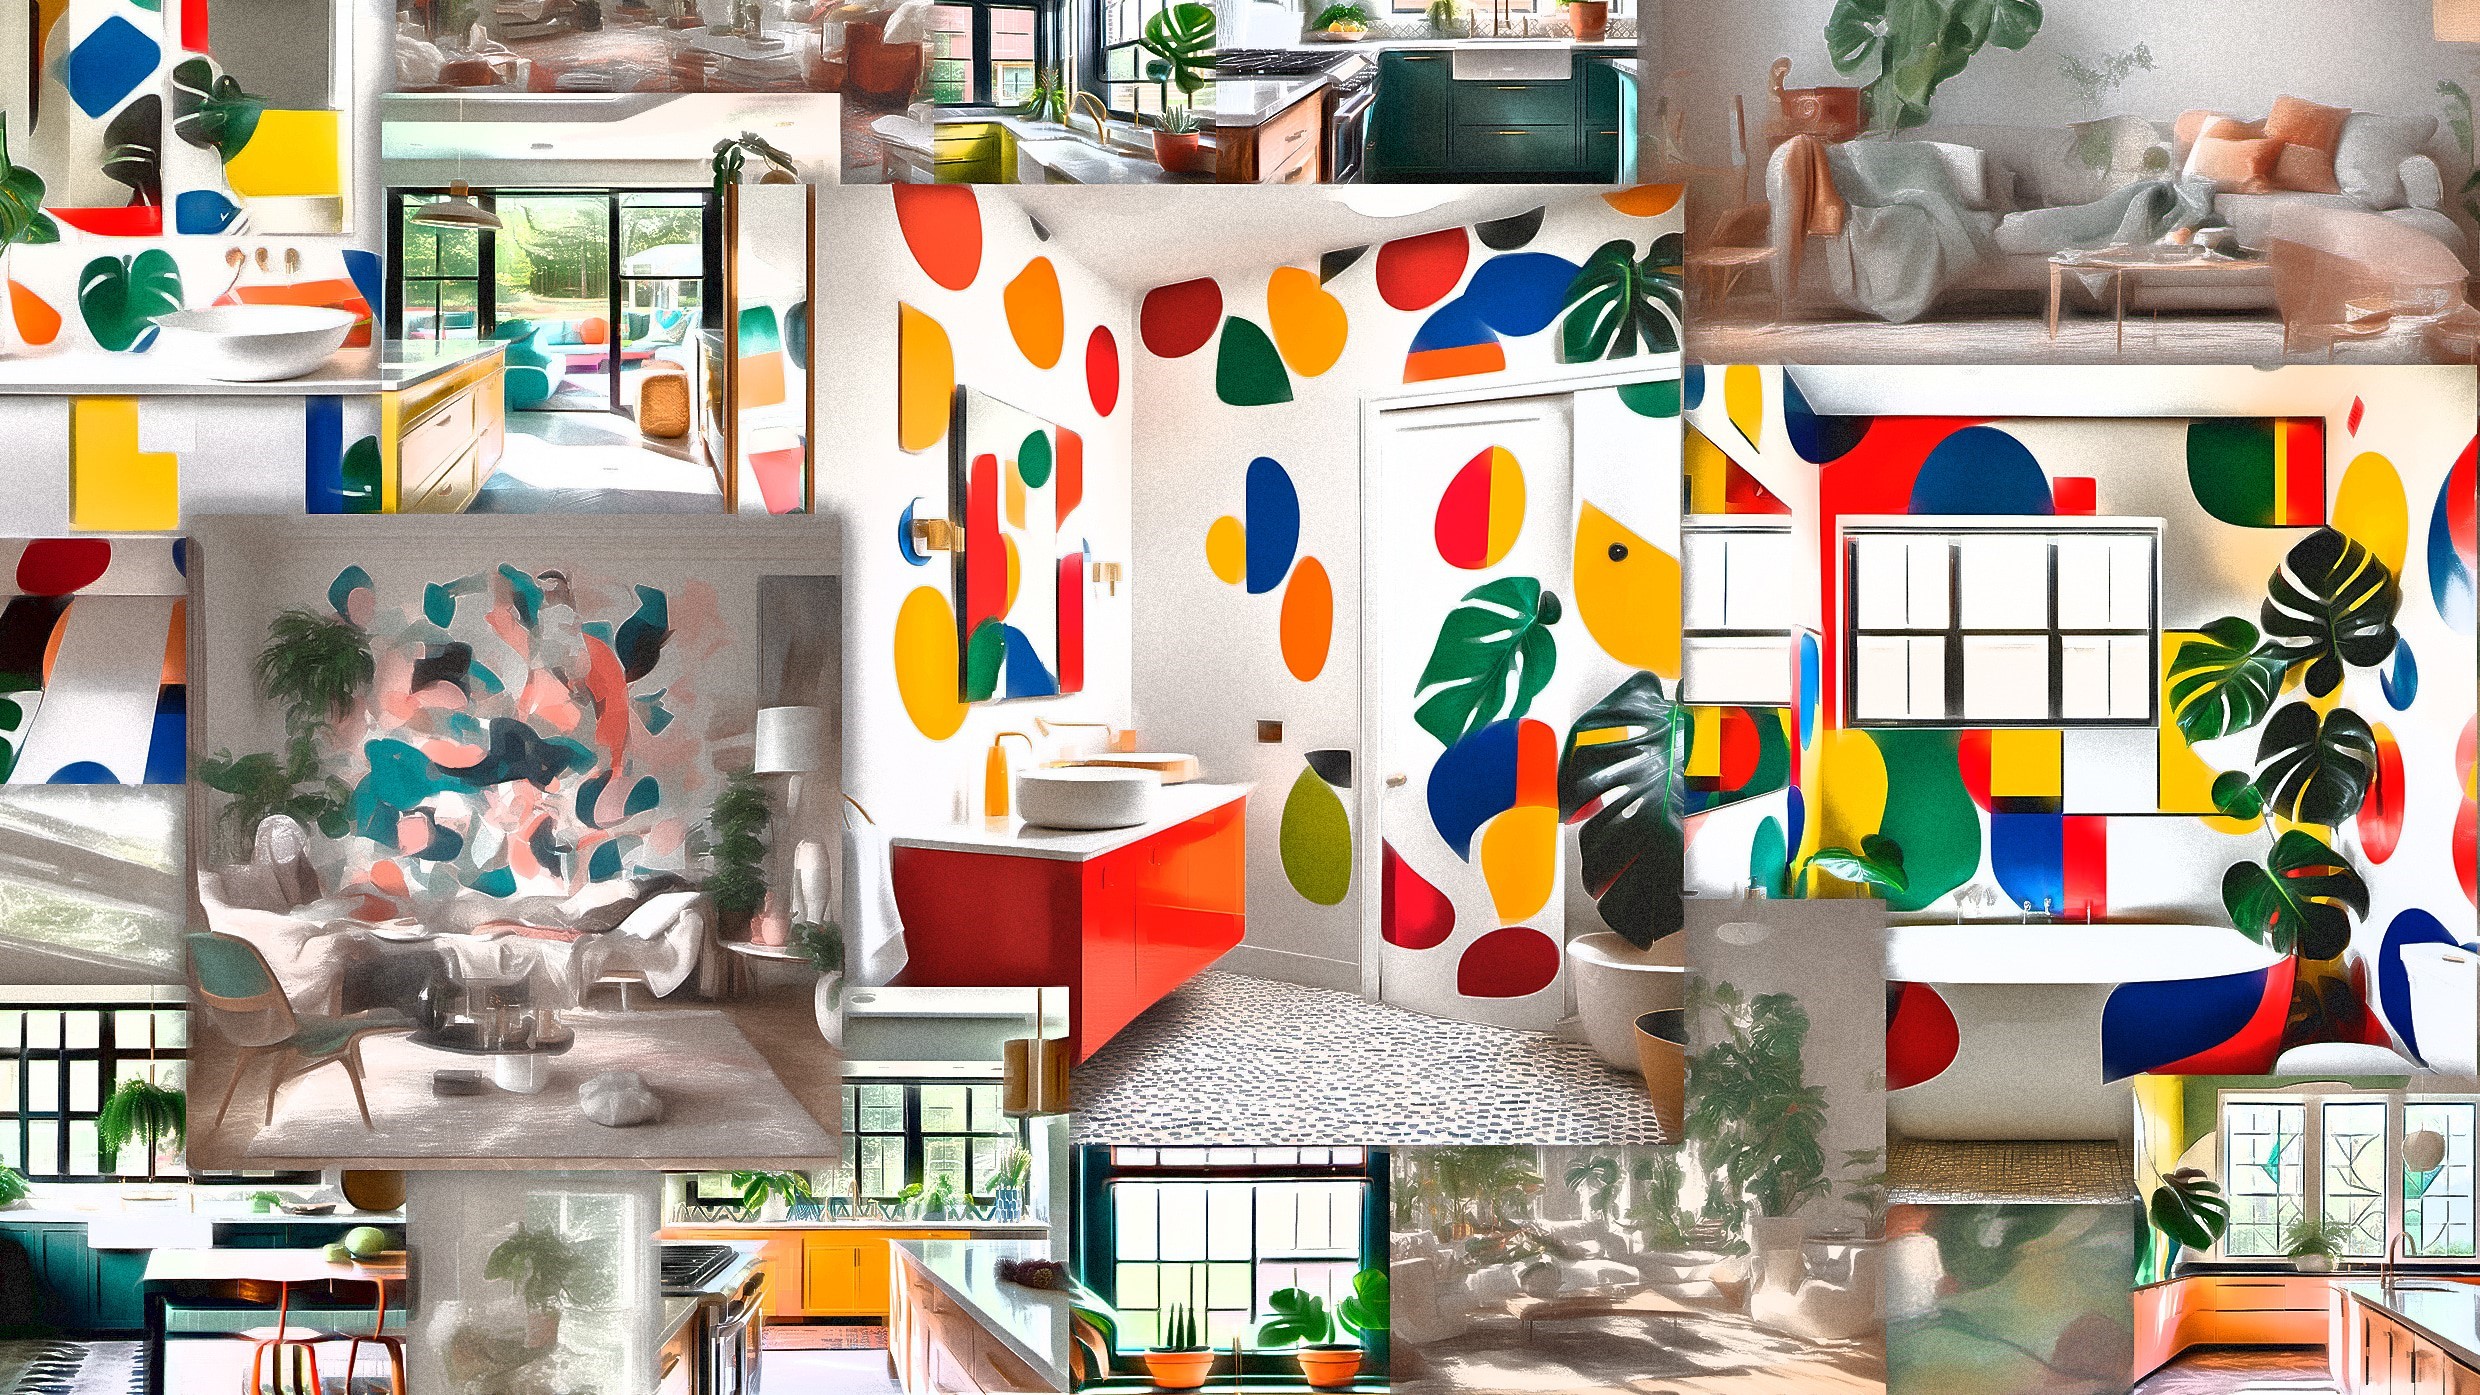 4 top interior design studios share how AI is changing their business